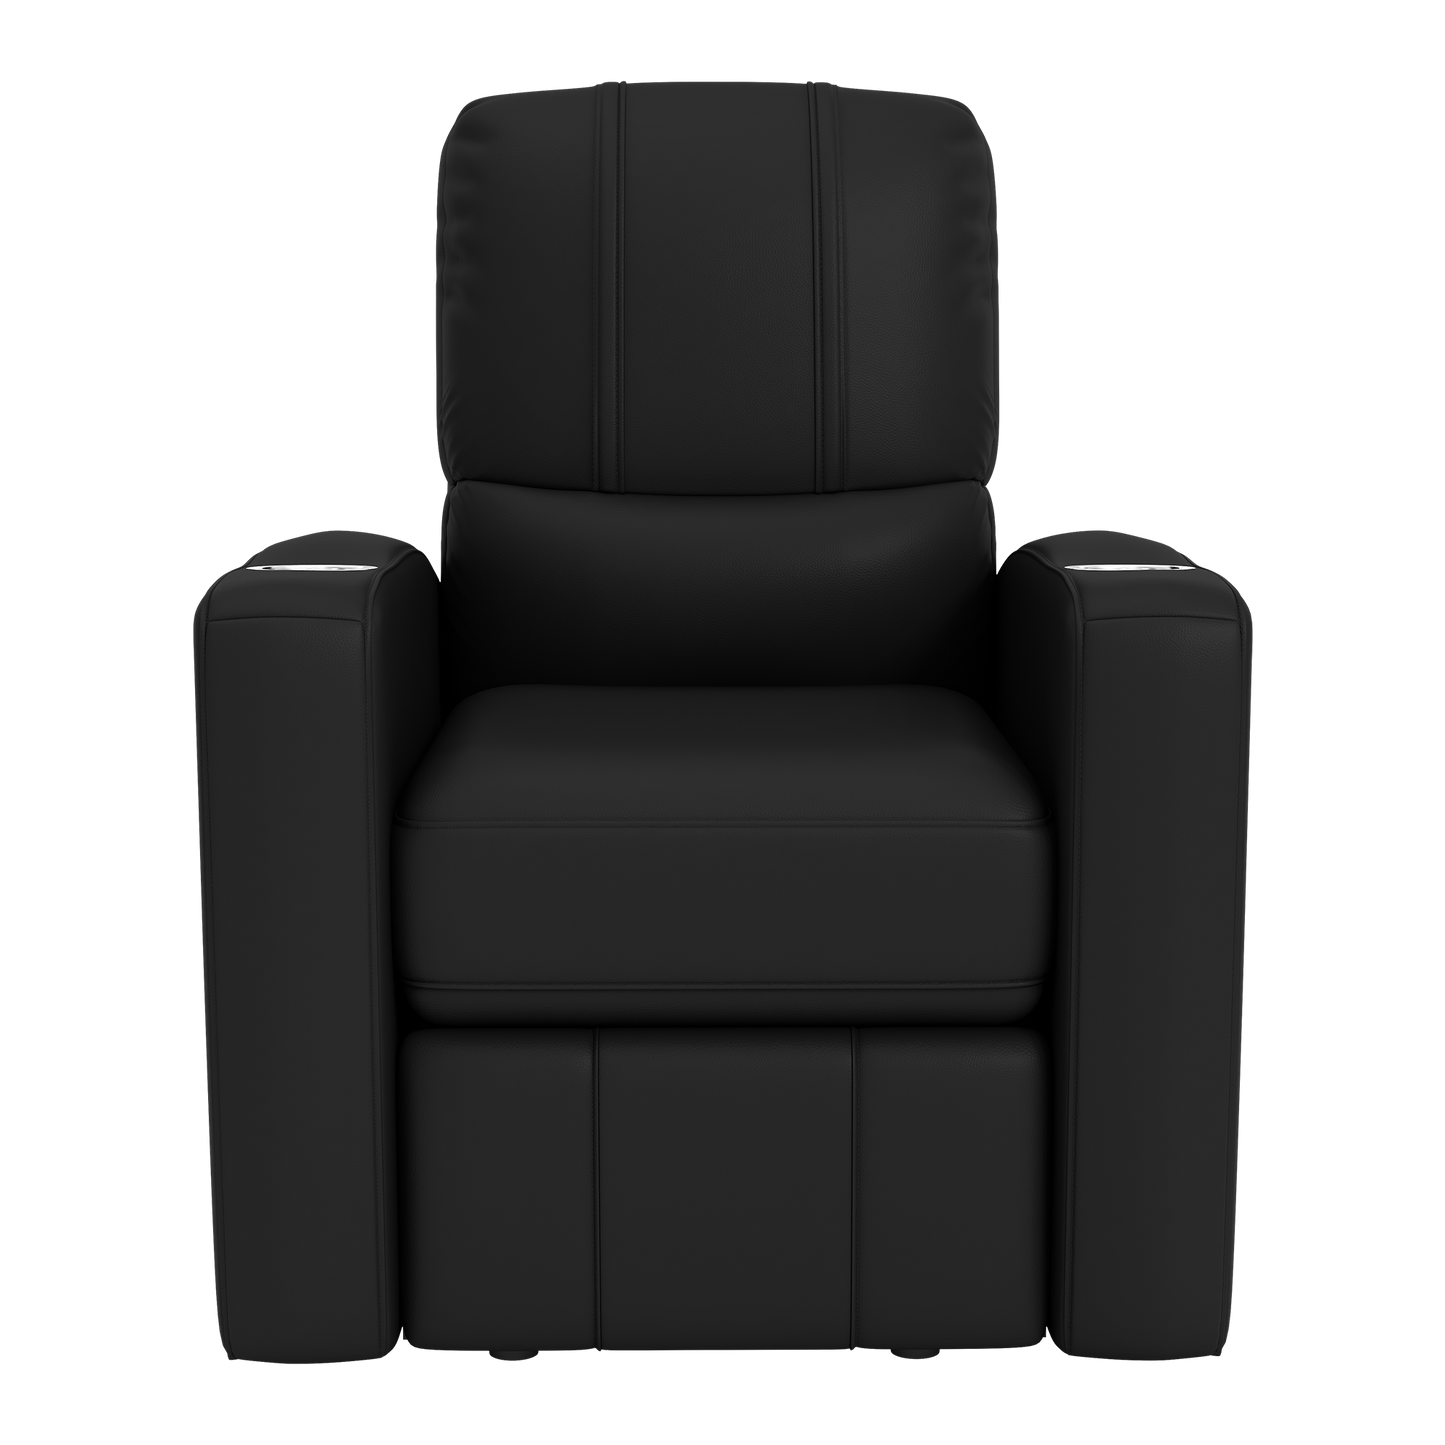 Stealth Recliner with Philadelphia Eagles Classic Logo